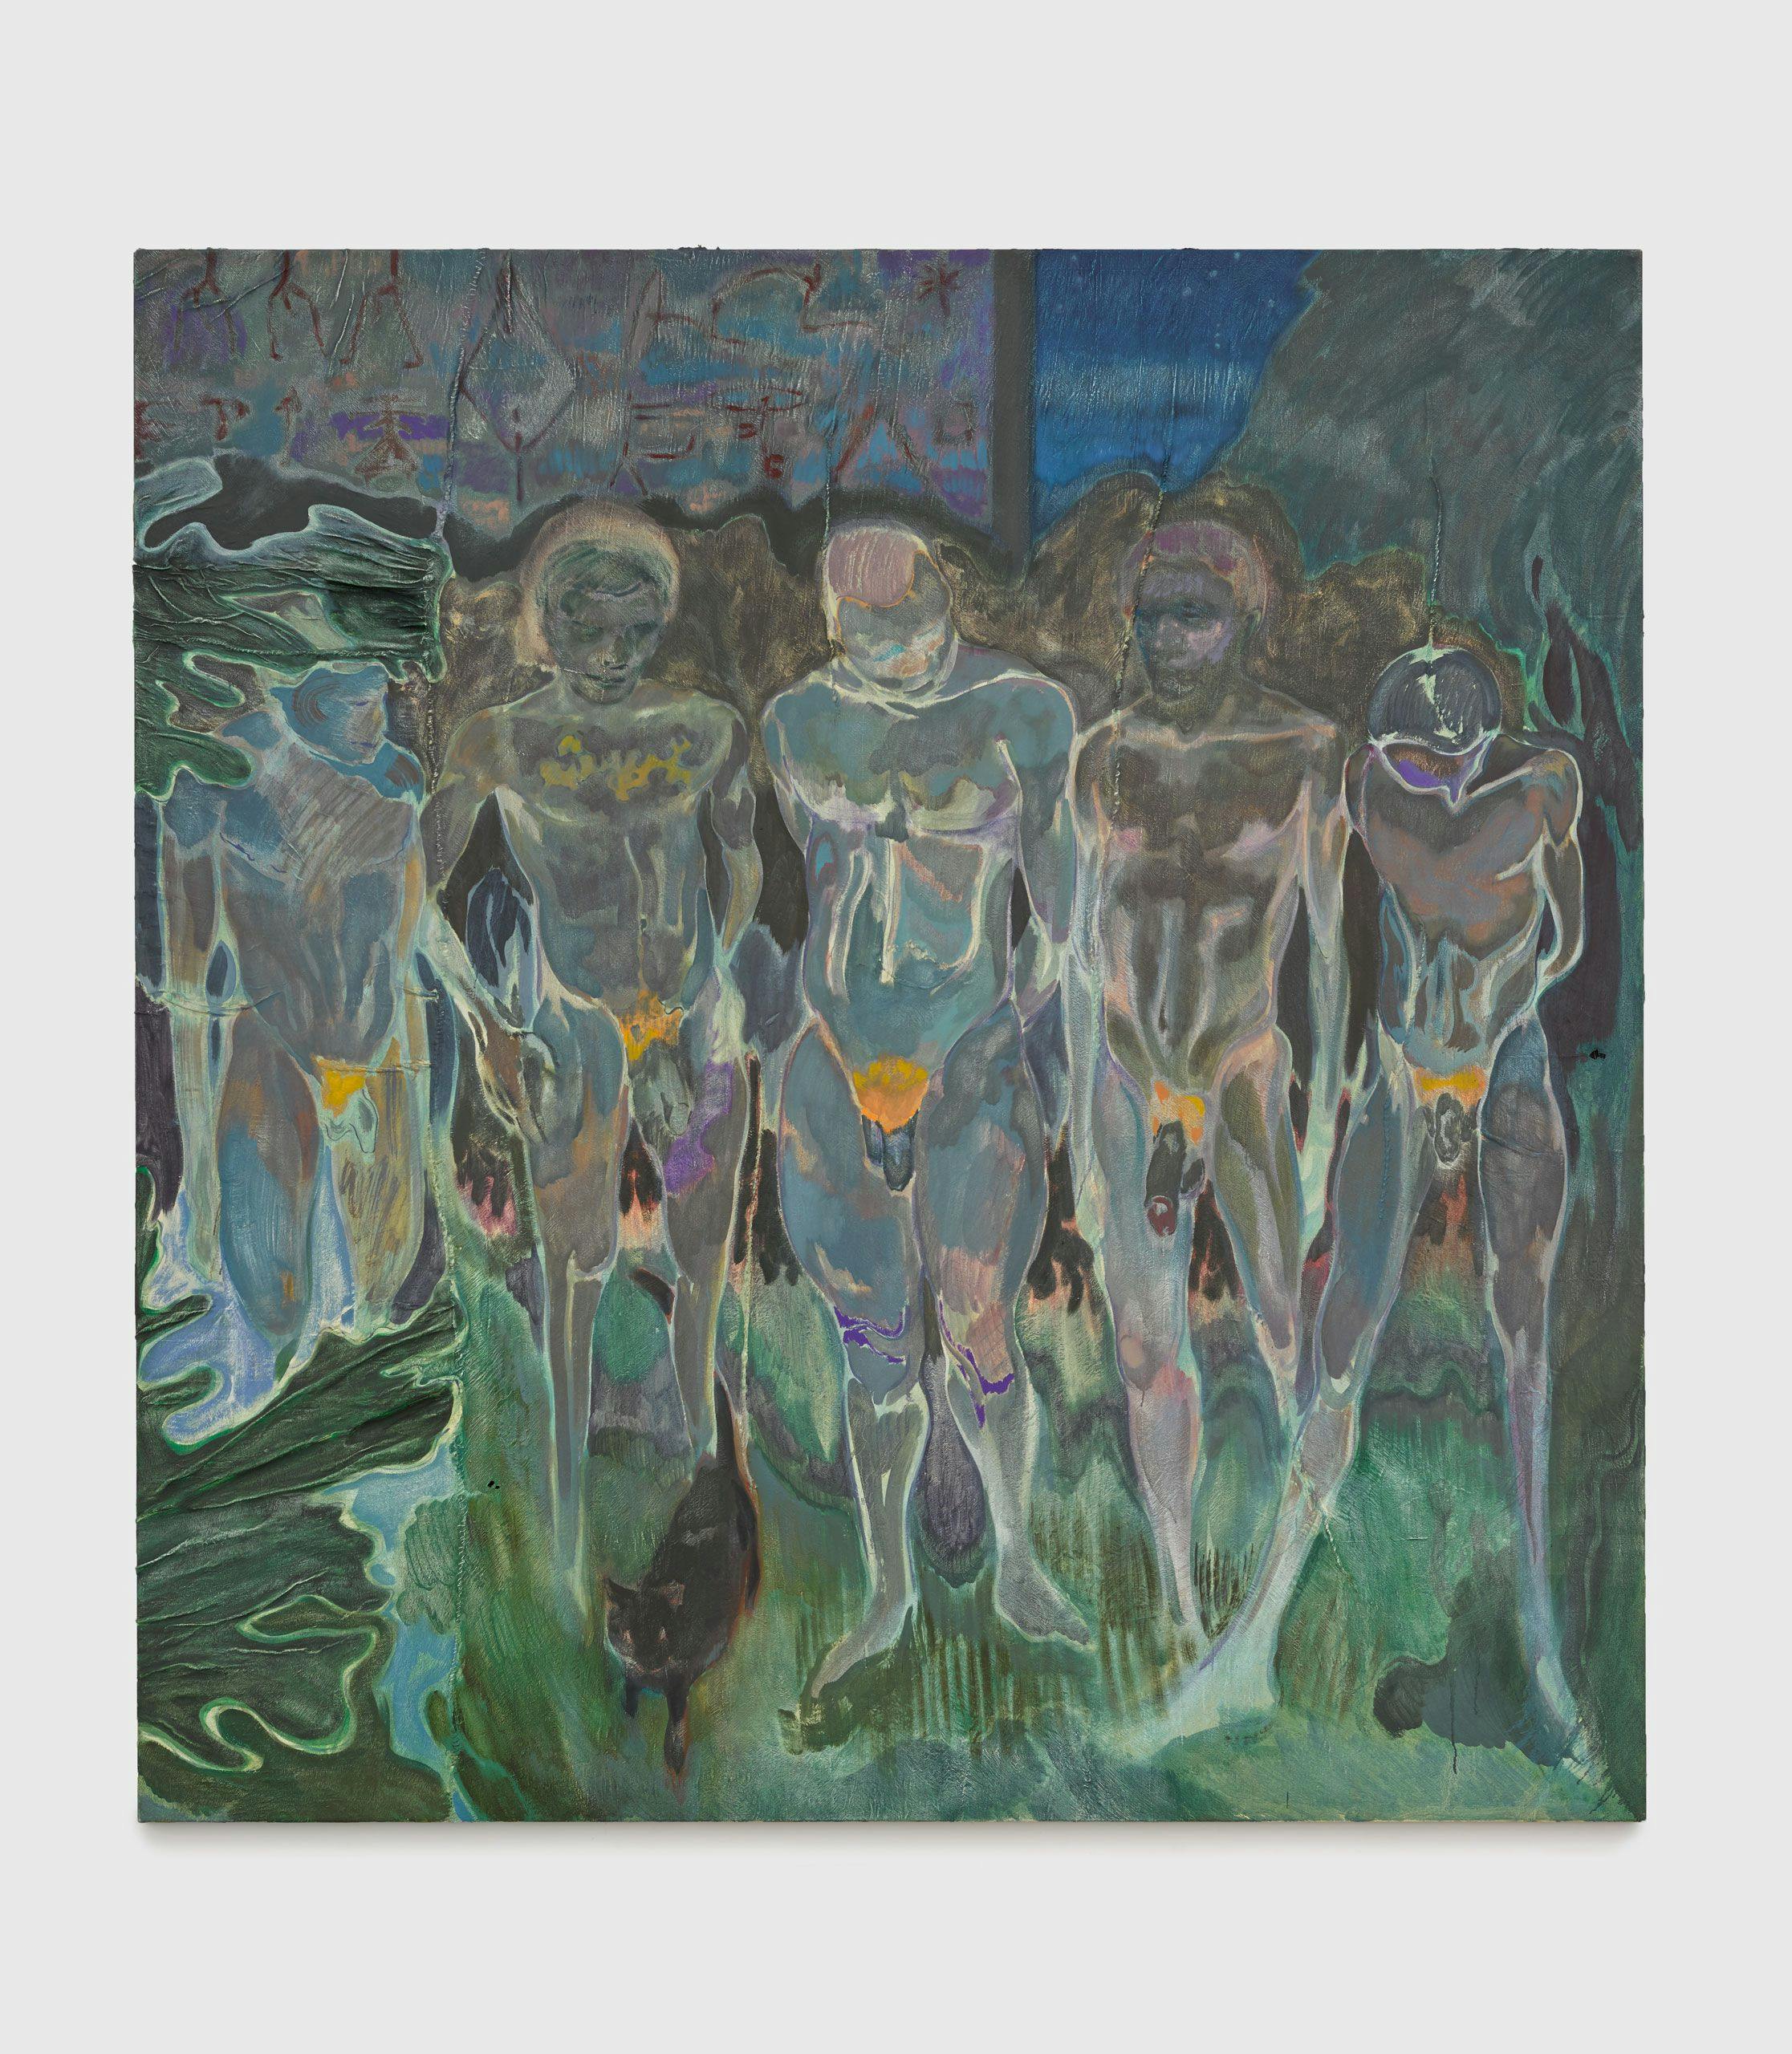 A painting by Michael Armitage, titled Nyali Beach Boys, dated 2016.